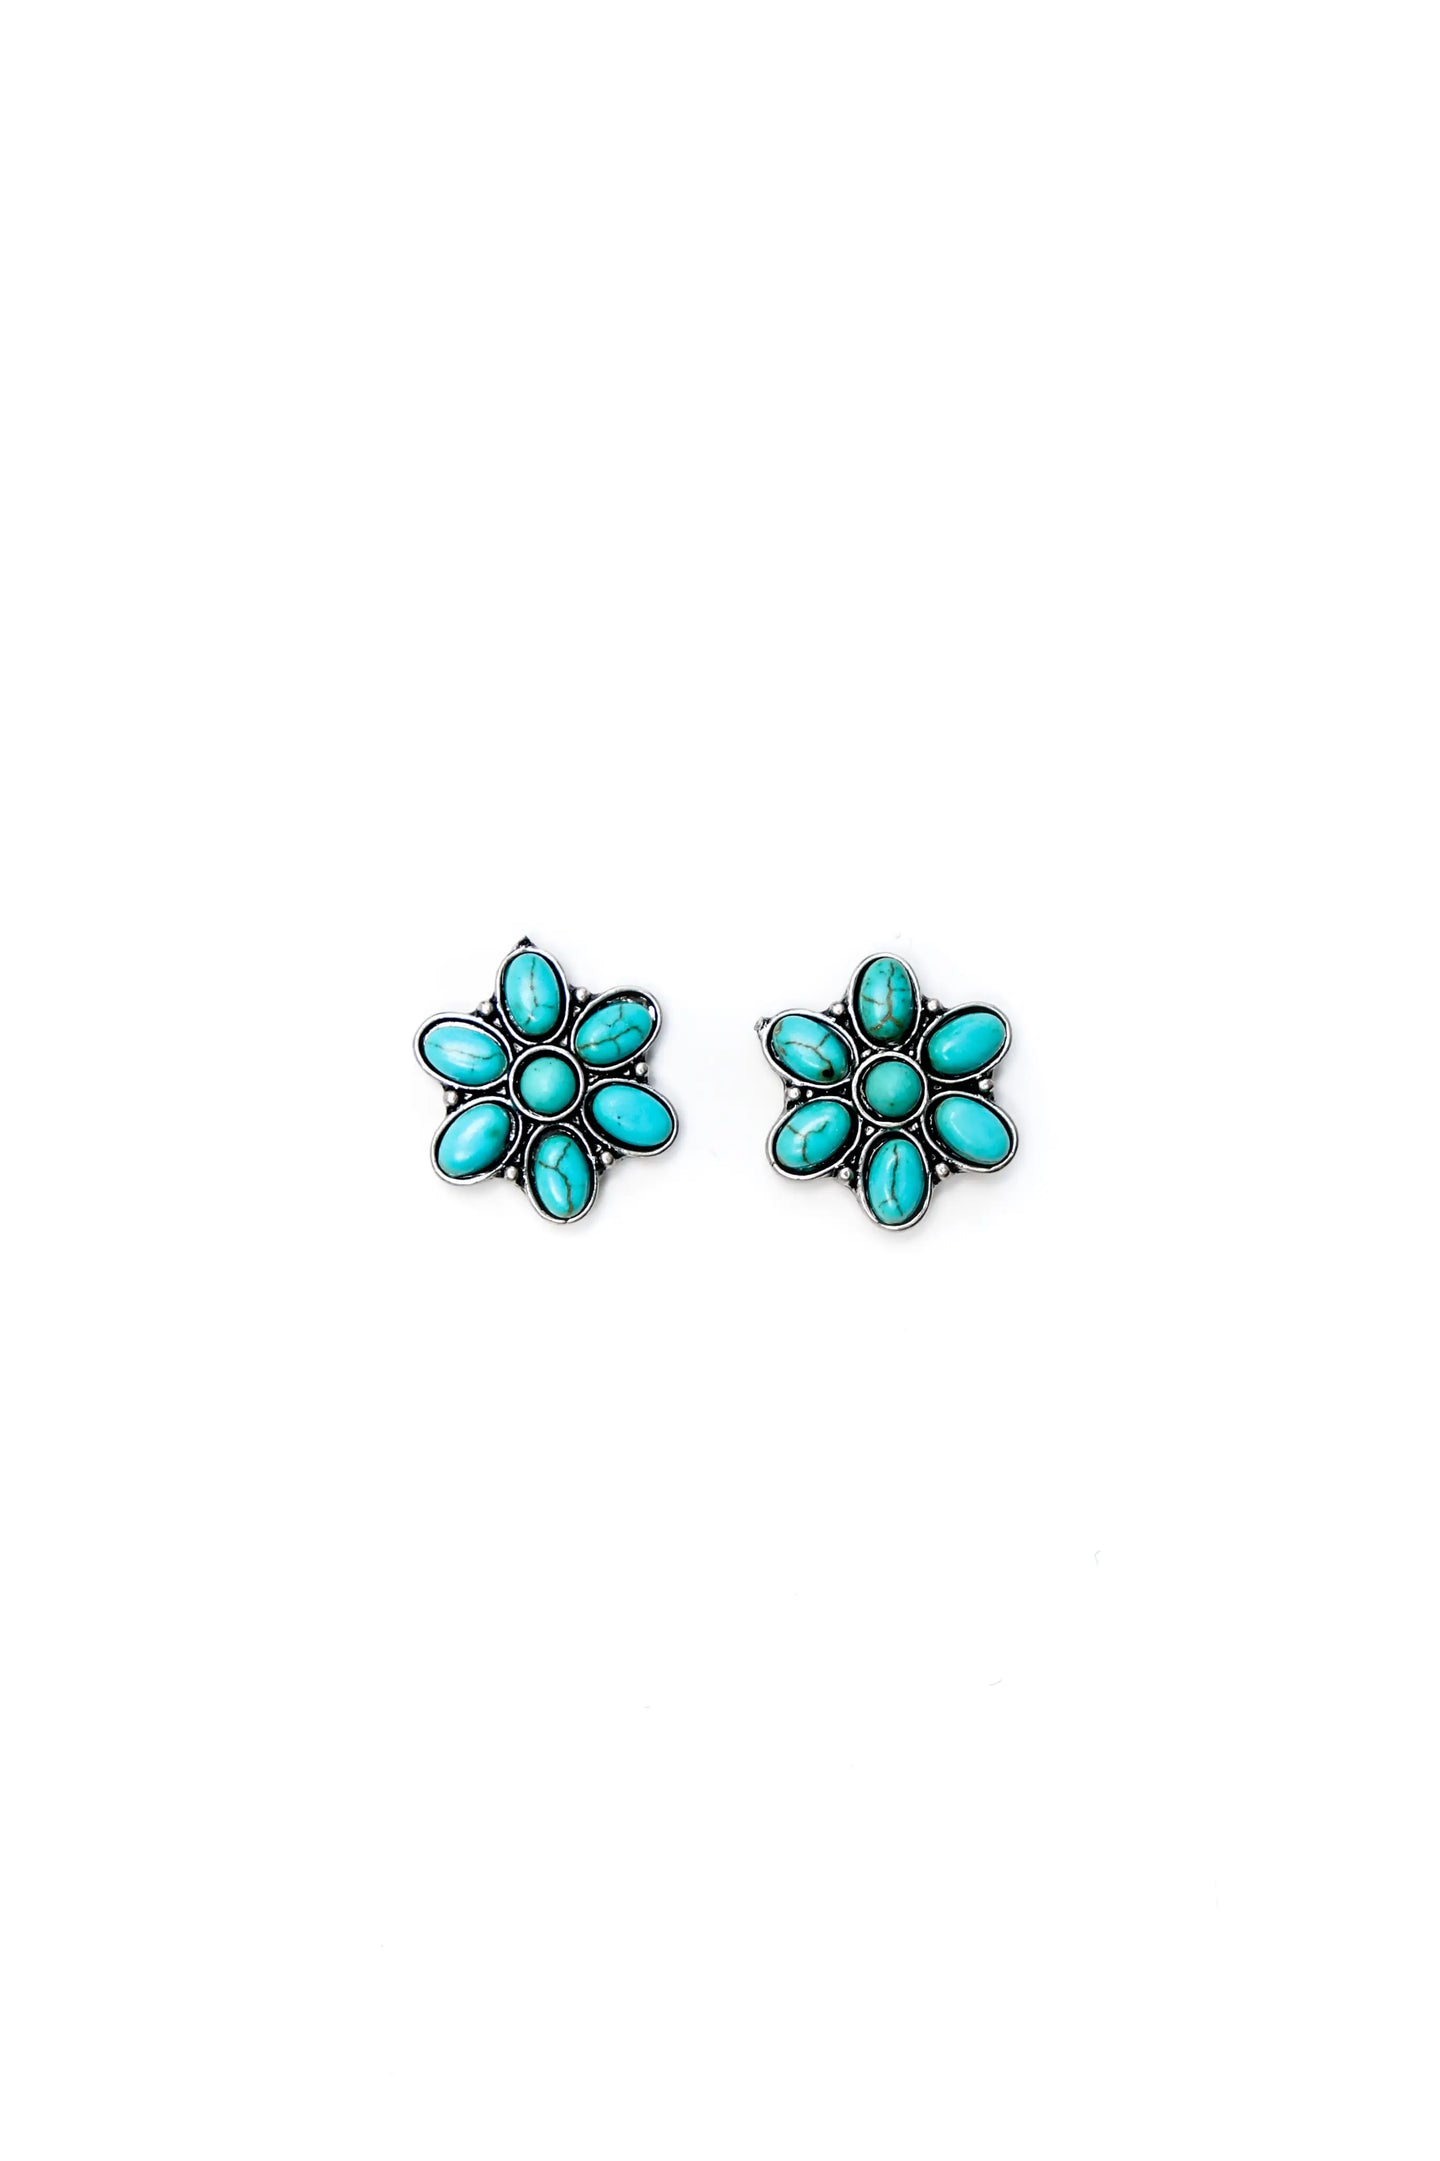 Turquoise flower stud earrings. Add that pop of color to your already amazing outfit. Silver and Turquoise stud earrings for women. Western style jewelry. Western jewelry for women. Turquoise Earrings. Turquoise Earrings. The Jolene Collection- Lucky Birds Boutique